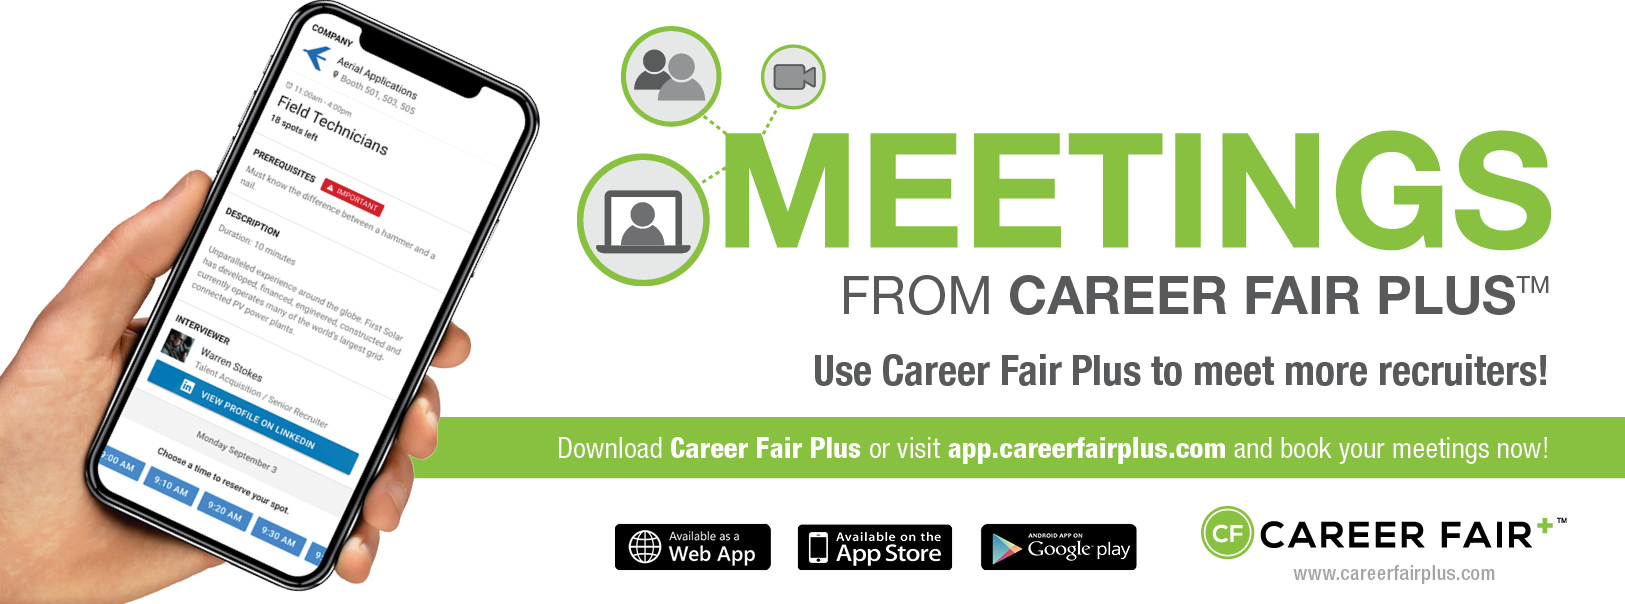 Promotional banner for Careers Fair Plus - reiteration of information available on the page